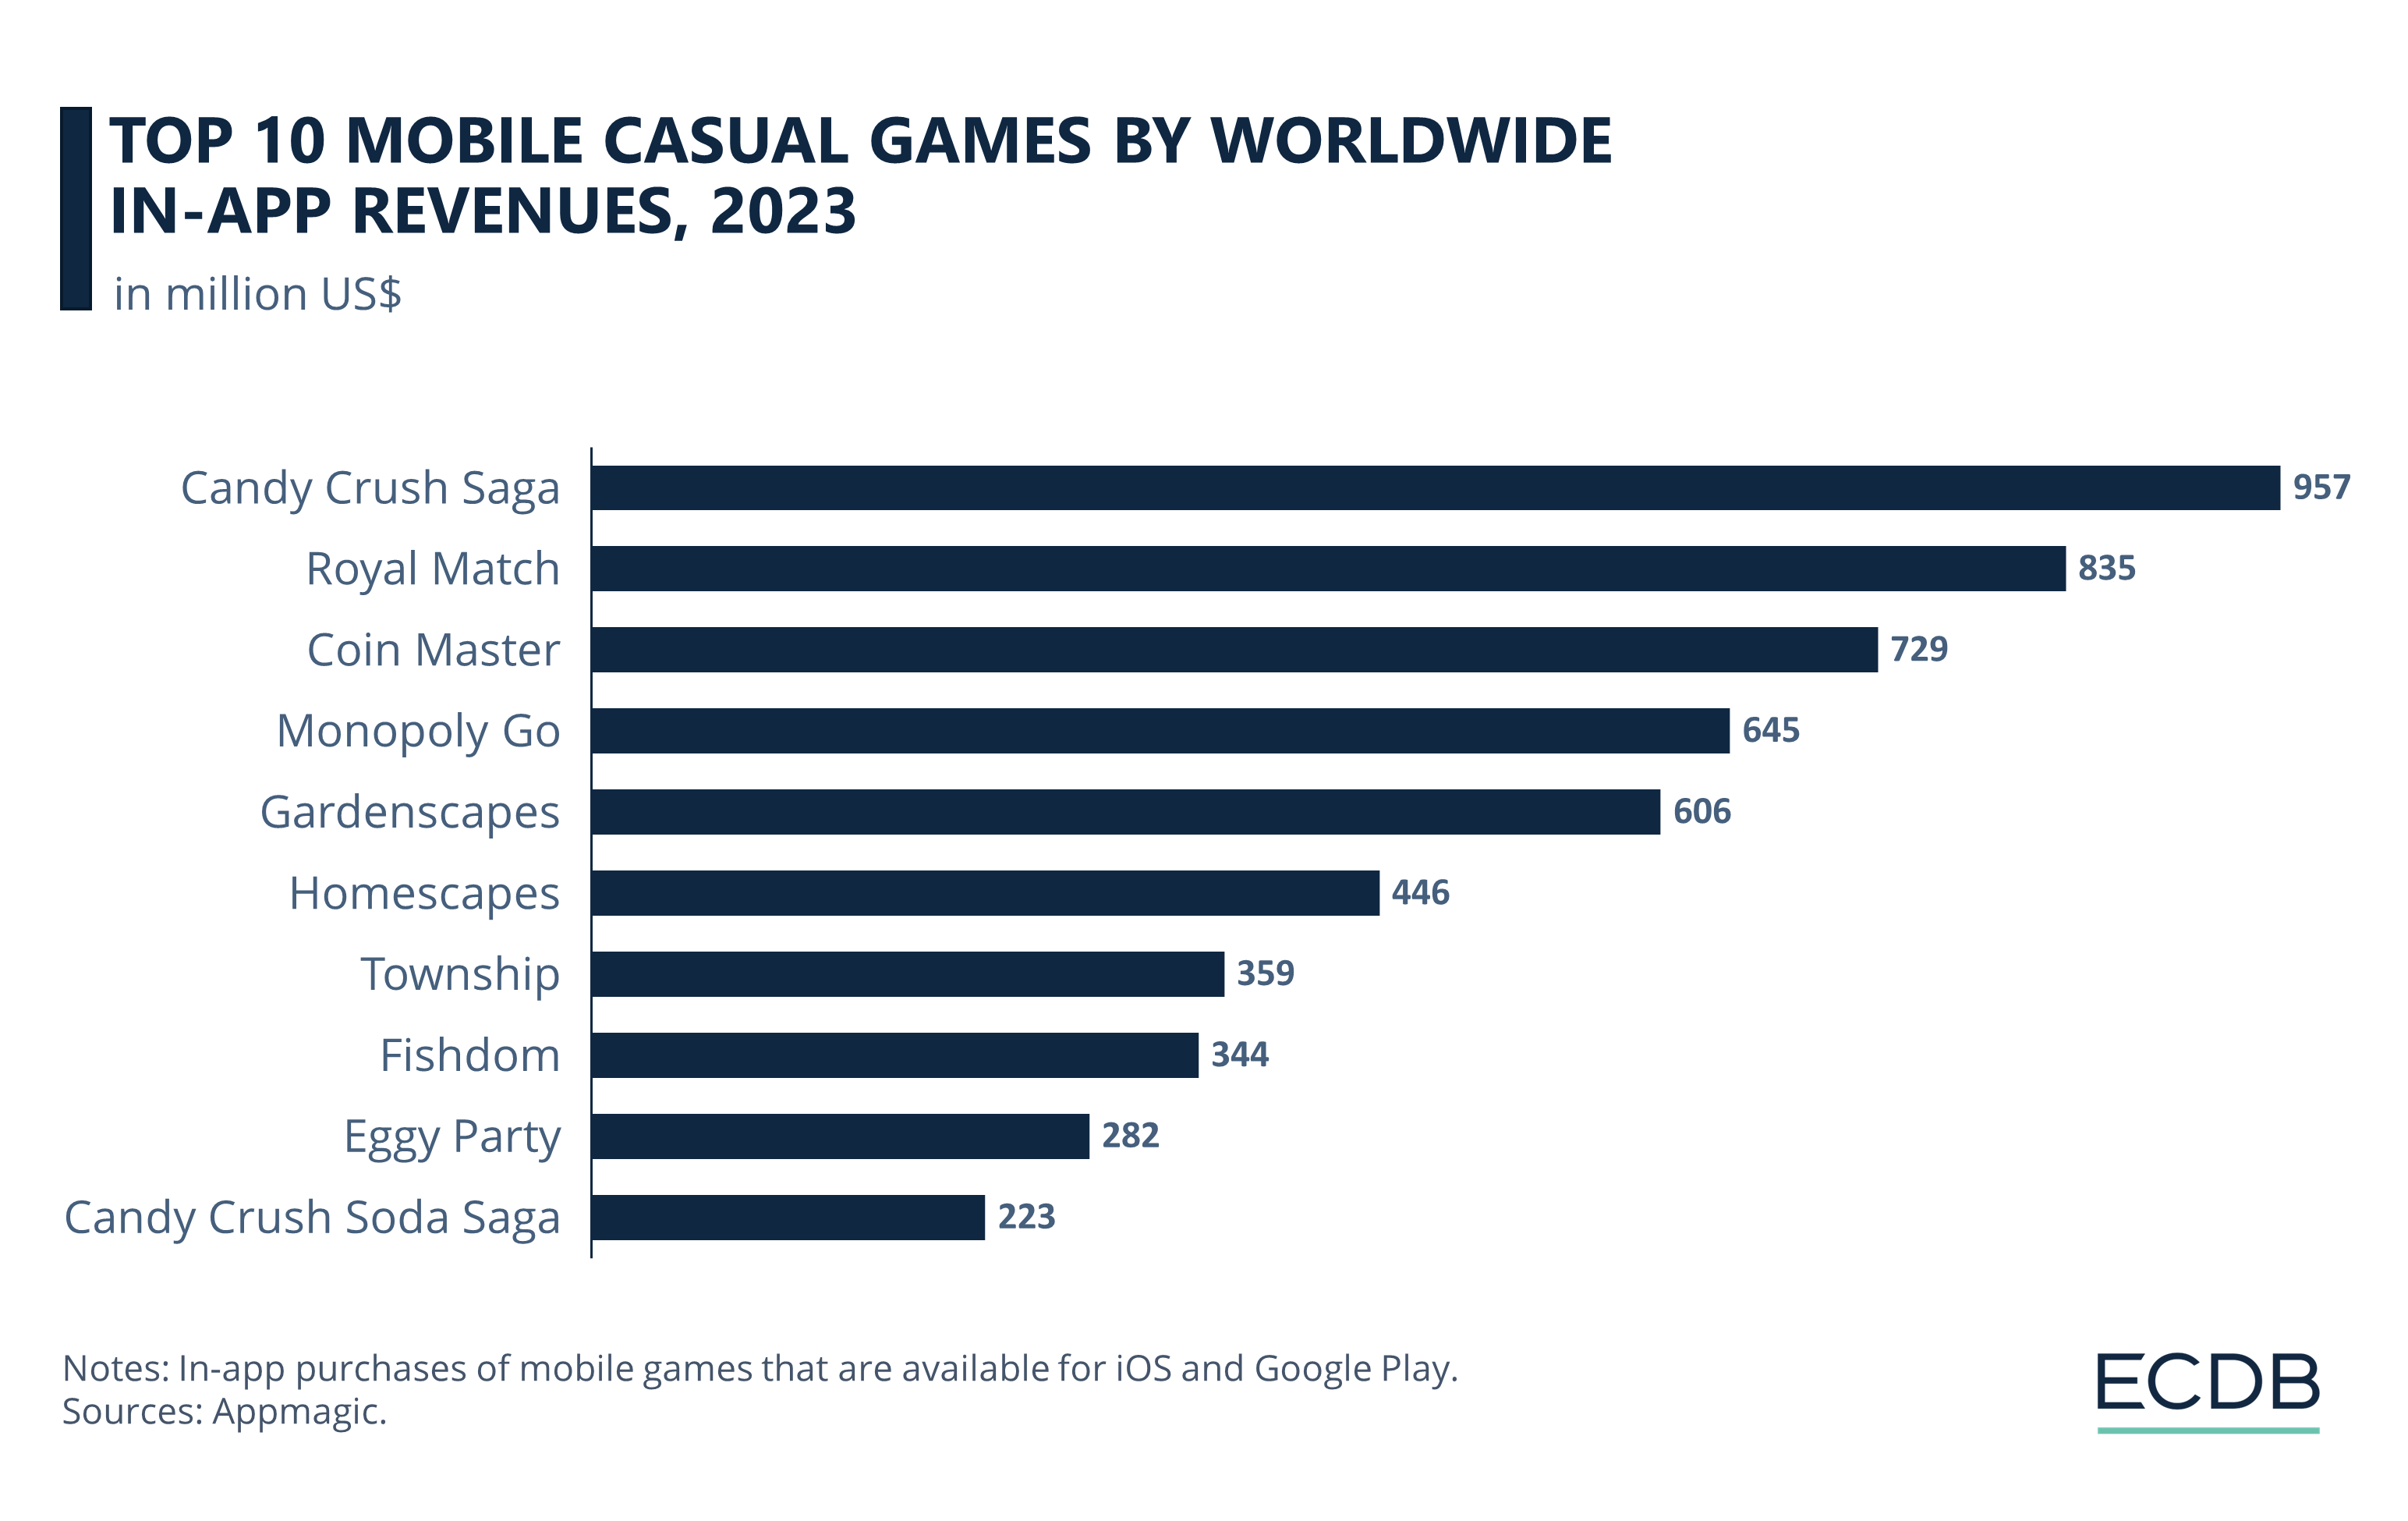 Top 10 Mobile Casual Games by Worldwide In-App Revenues, 2023